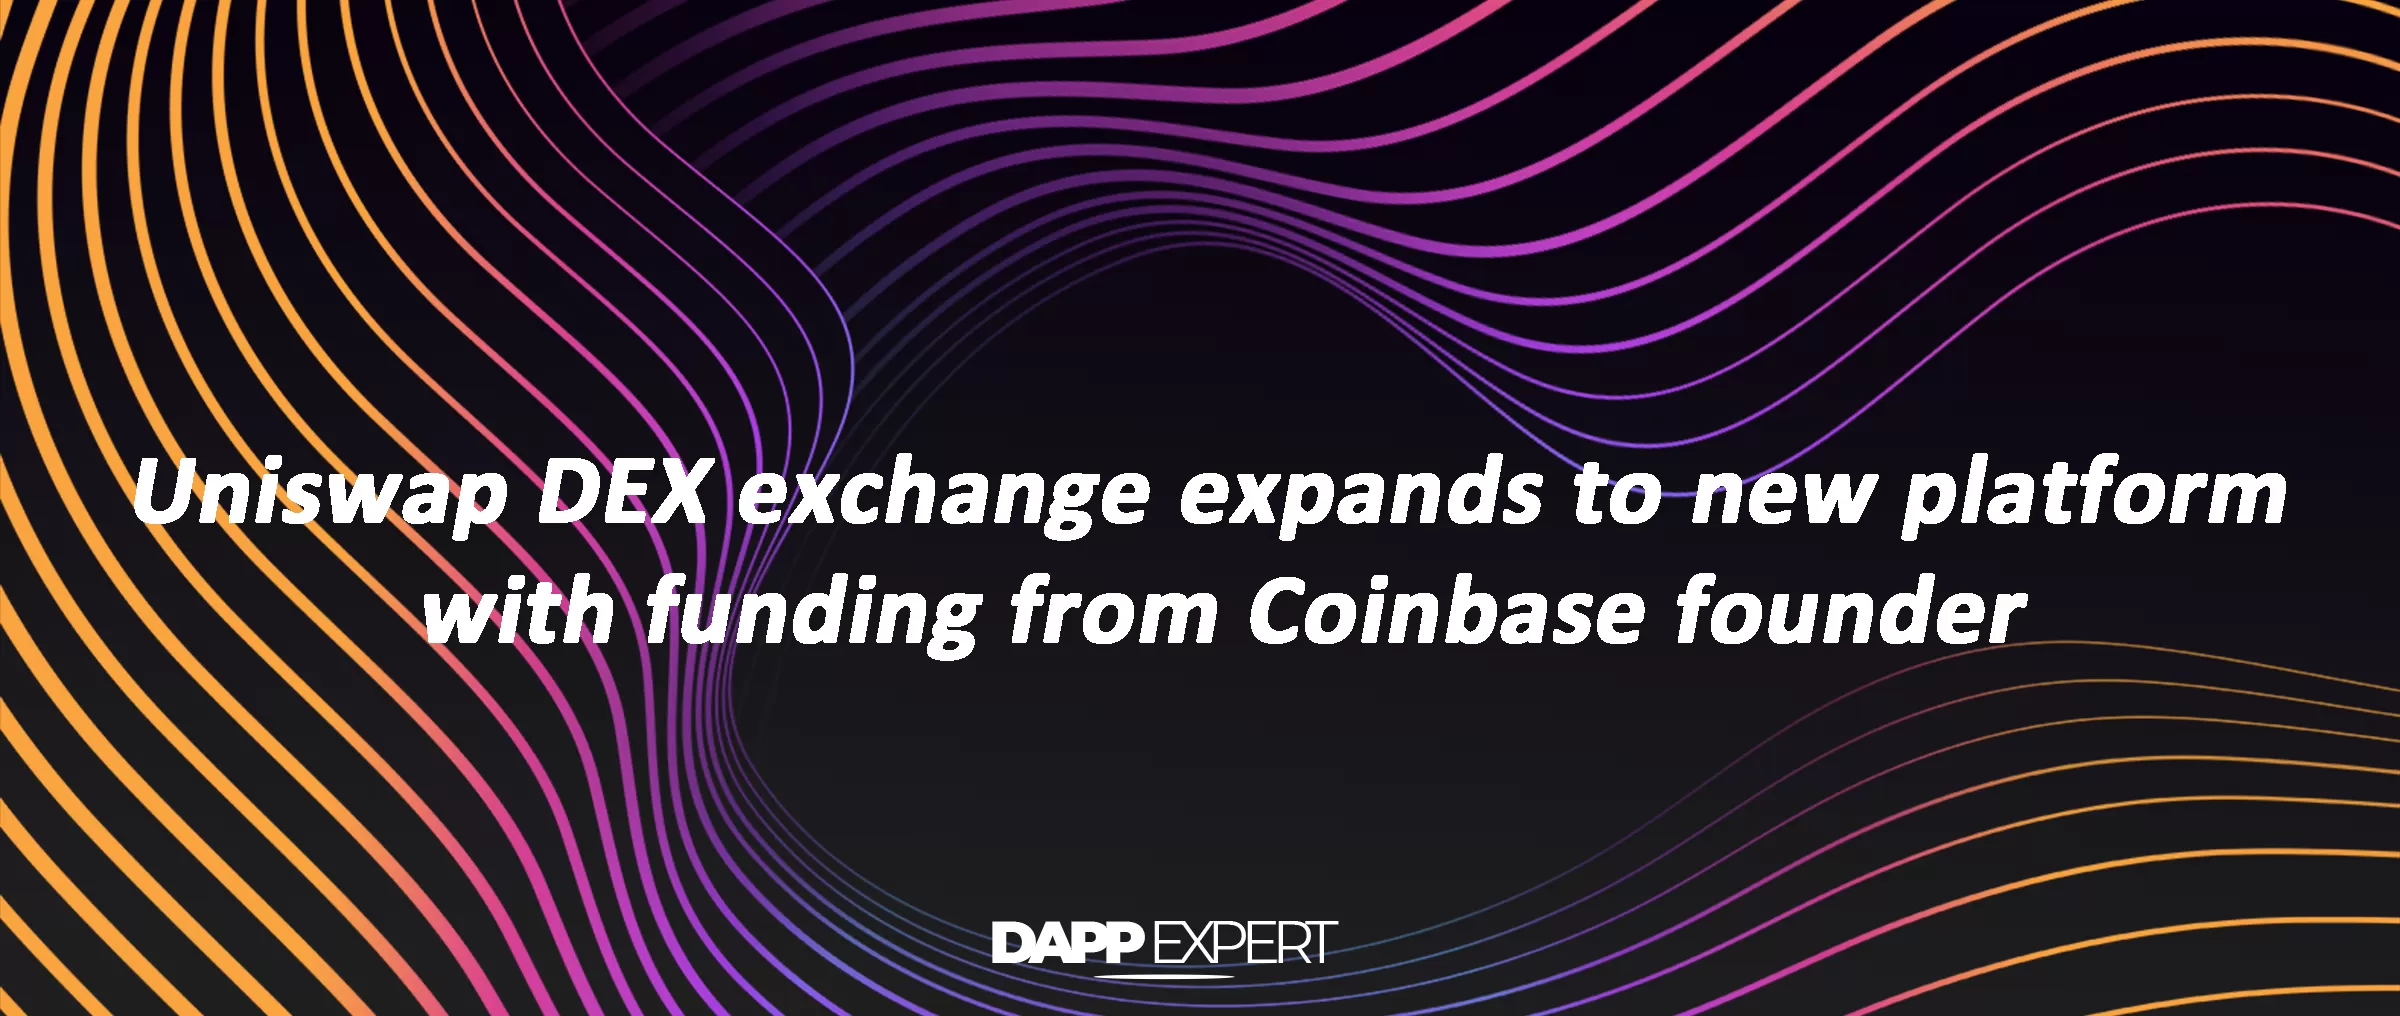 Uniswap DEX exchange expands to new platform with funding from Coinbase founder